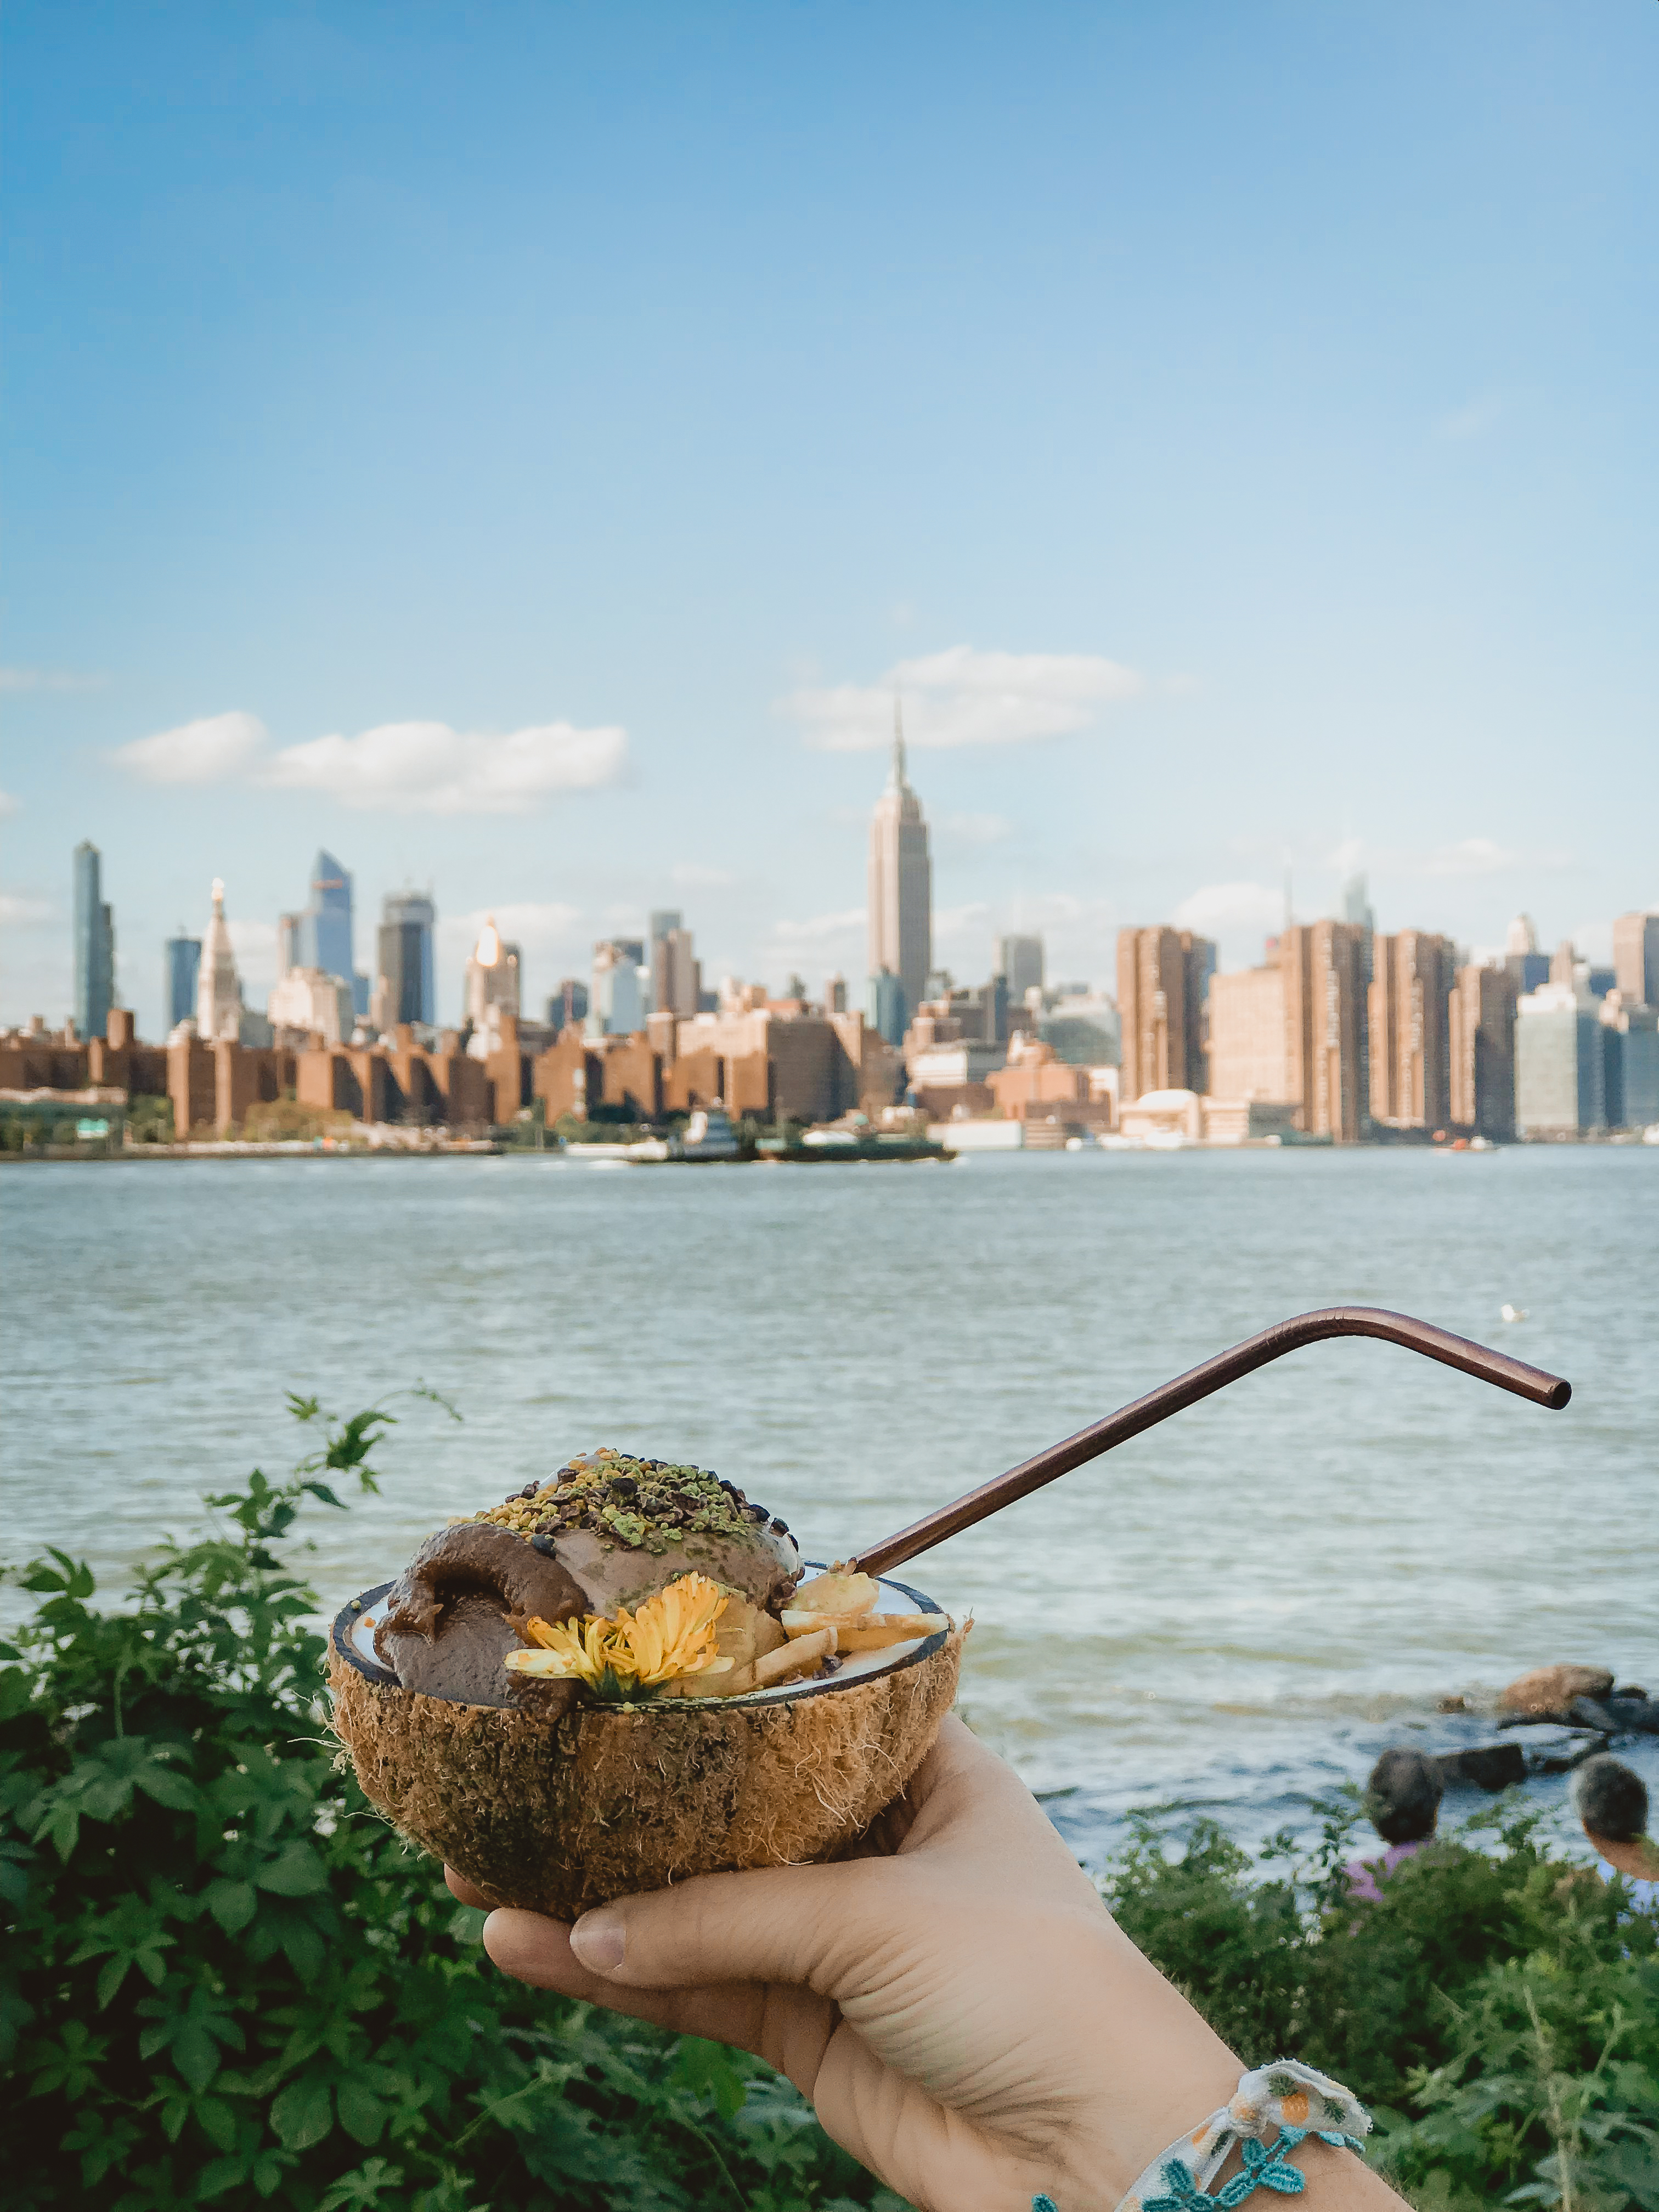 What To Do On A Fall Day in Williamsburg: Rooftop Bars and Smorgasburg Overthrow Boxing Brooklyn New York Mahattan travel guide SVADORE workout Saturday weekend smorgasburg the hoxton the wythe summerly klein william vale rooftop bars ferry 